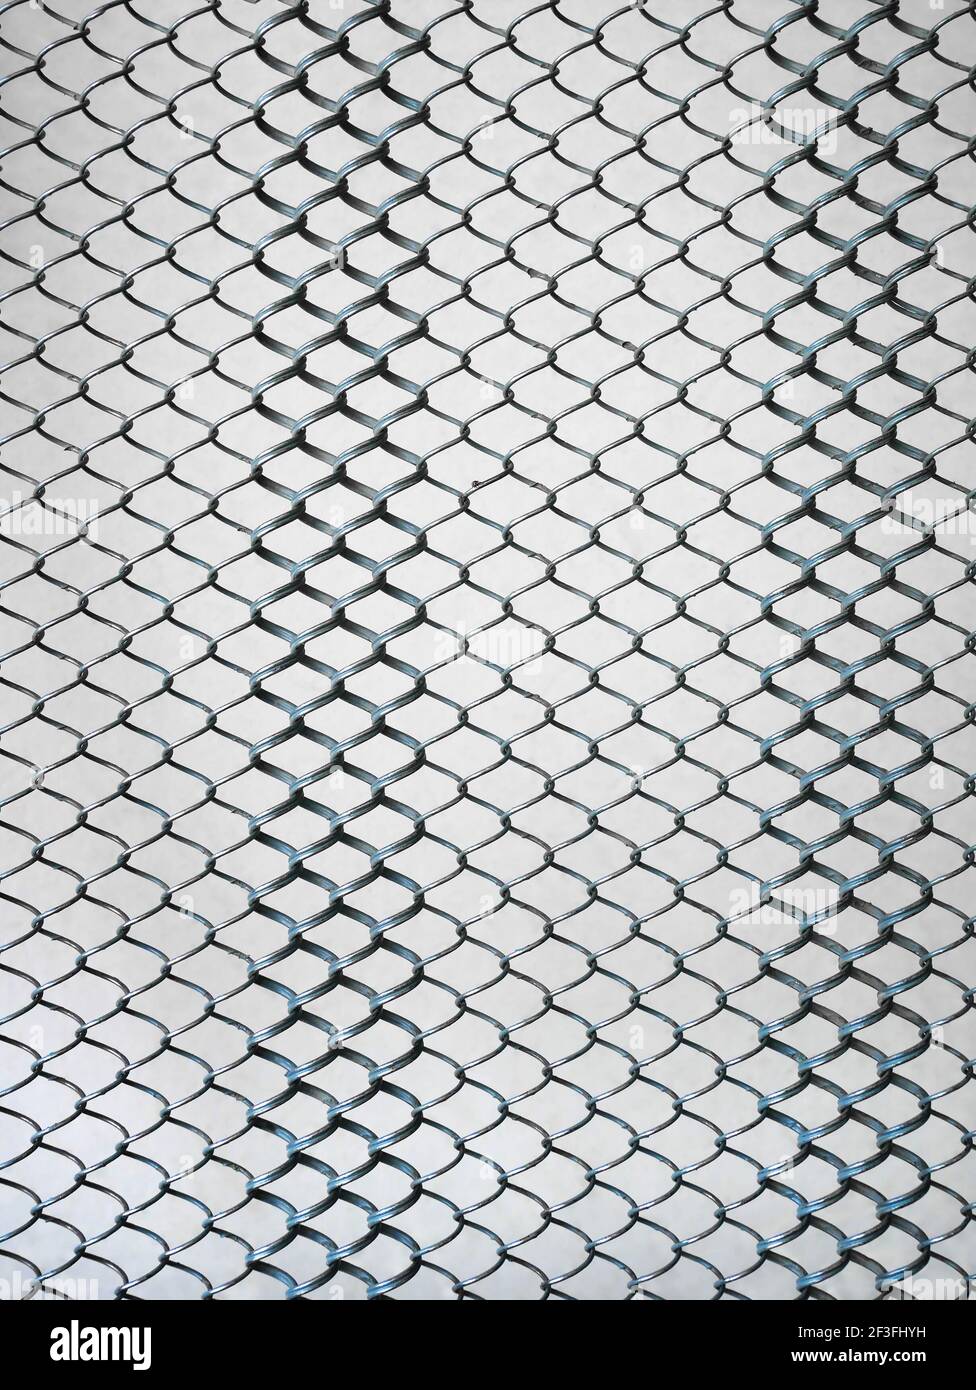 Metal springy mesh with chain link on a beige background, part of an old steel mattress with iron linked elements, close-up, vertical Stock Photo